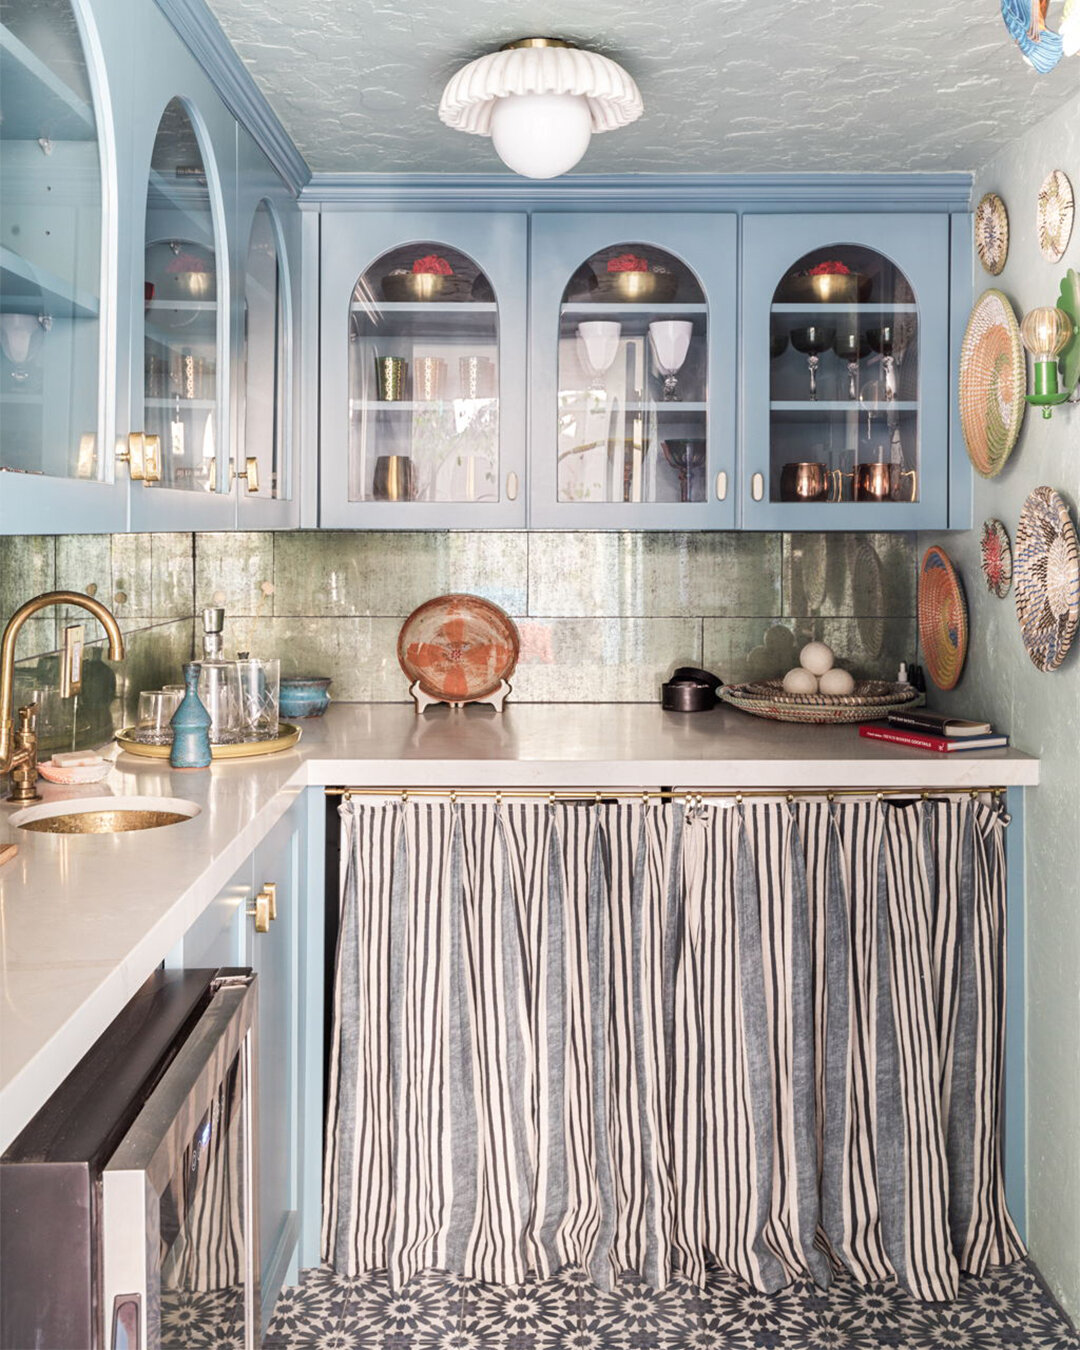 The #1 interior design trend for 2024 according to @dominomag? Unique kitchens. We're loving this trend - particularly in this beauty listed by @karenlowerrealestate. 😍
.
.
.
#interiordesign #architecture #luxuryrealestate